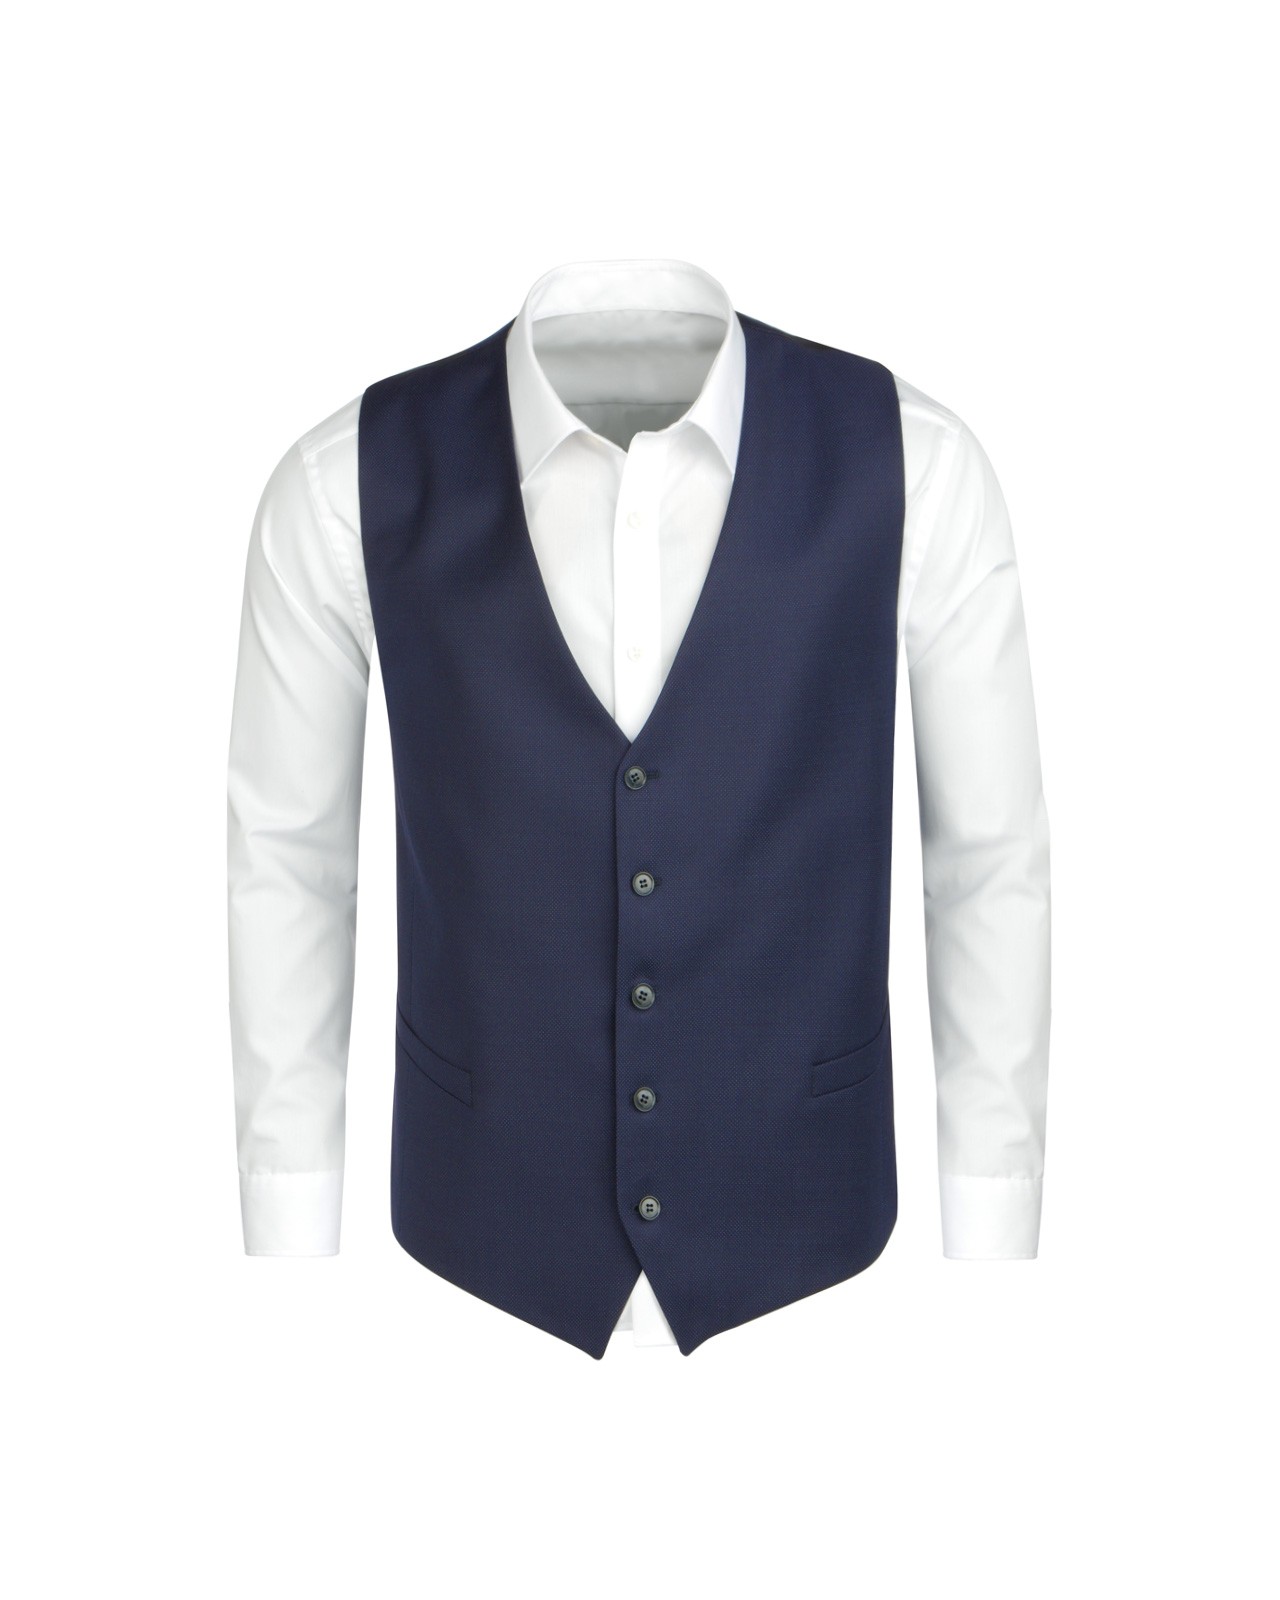 gilet homme costume grande taille